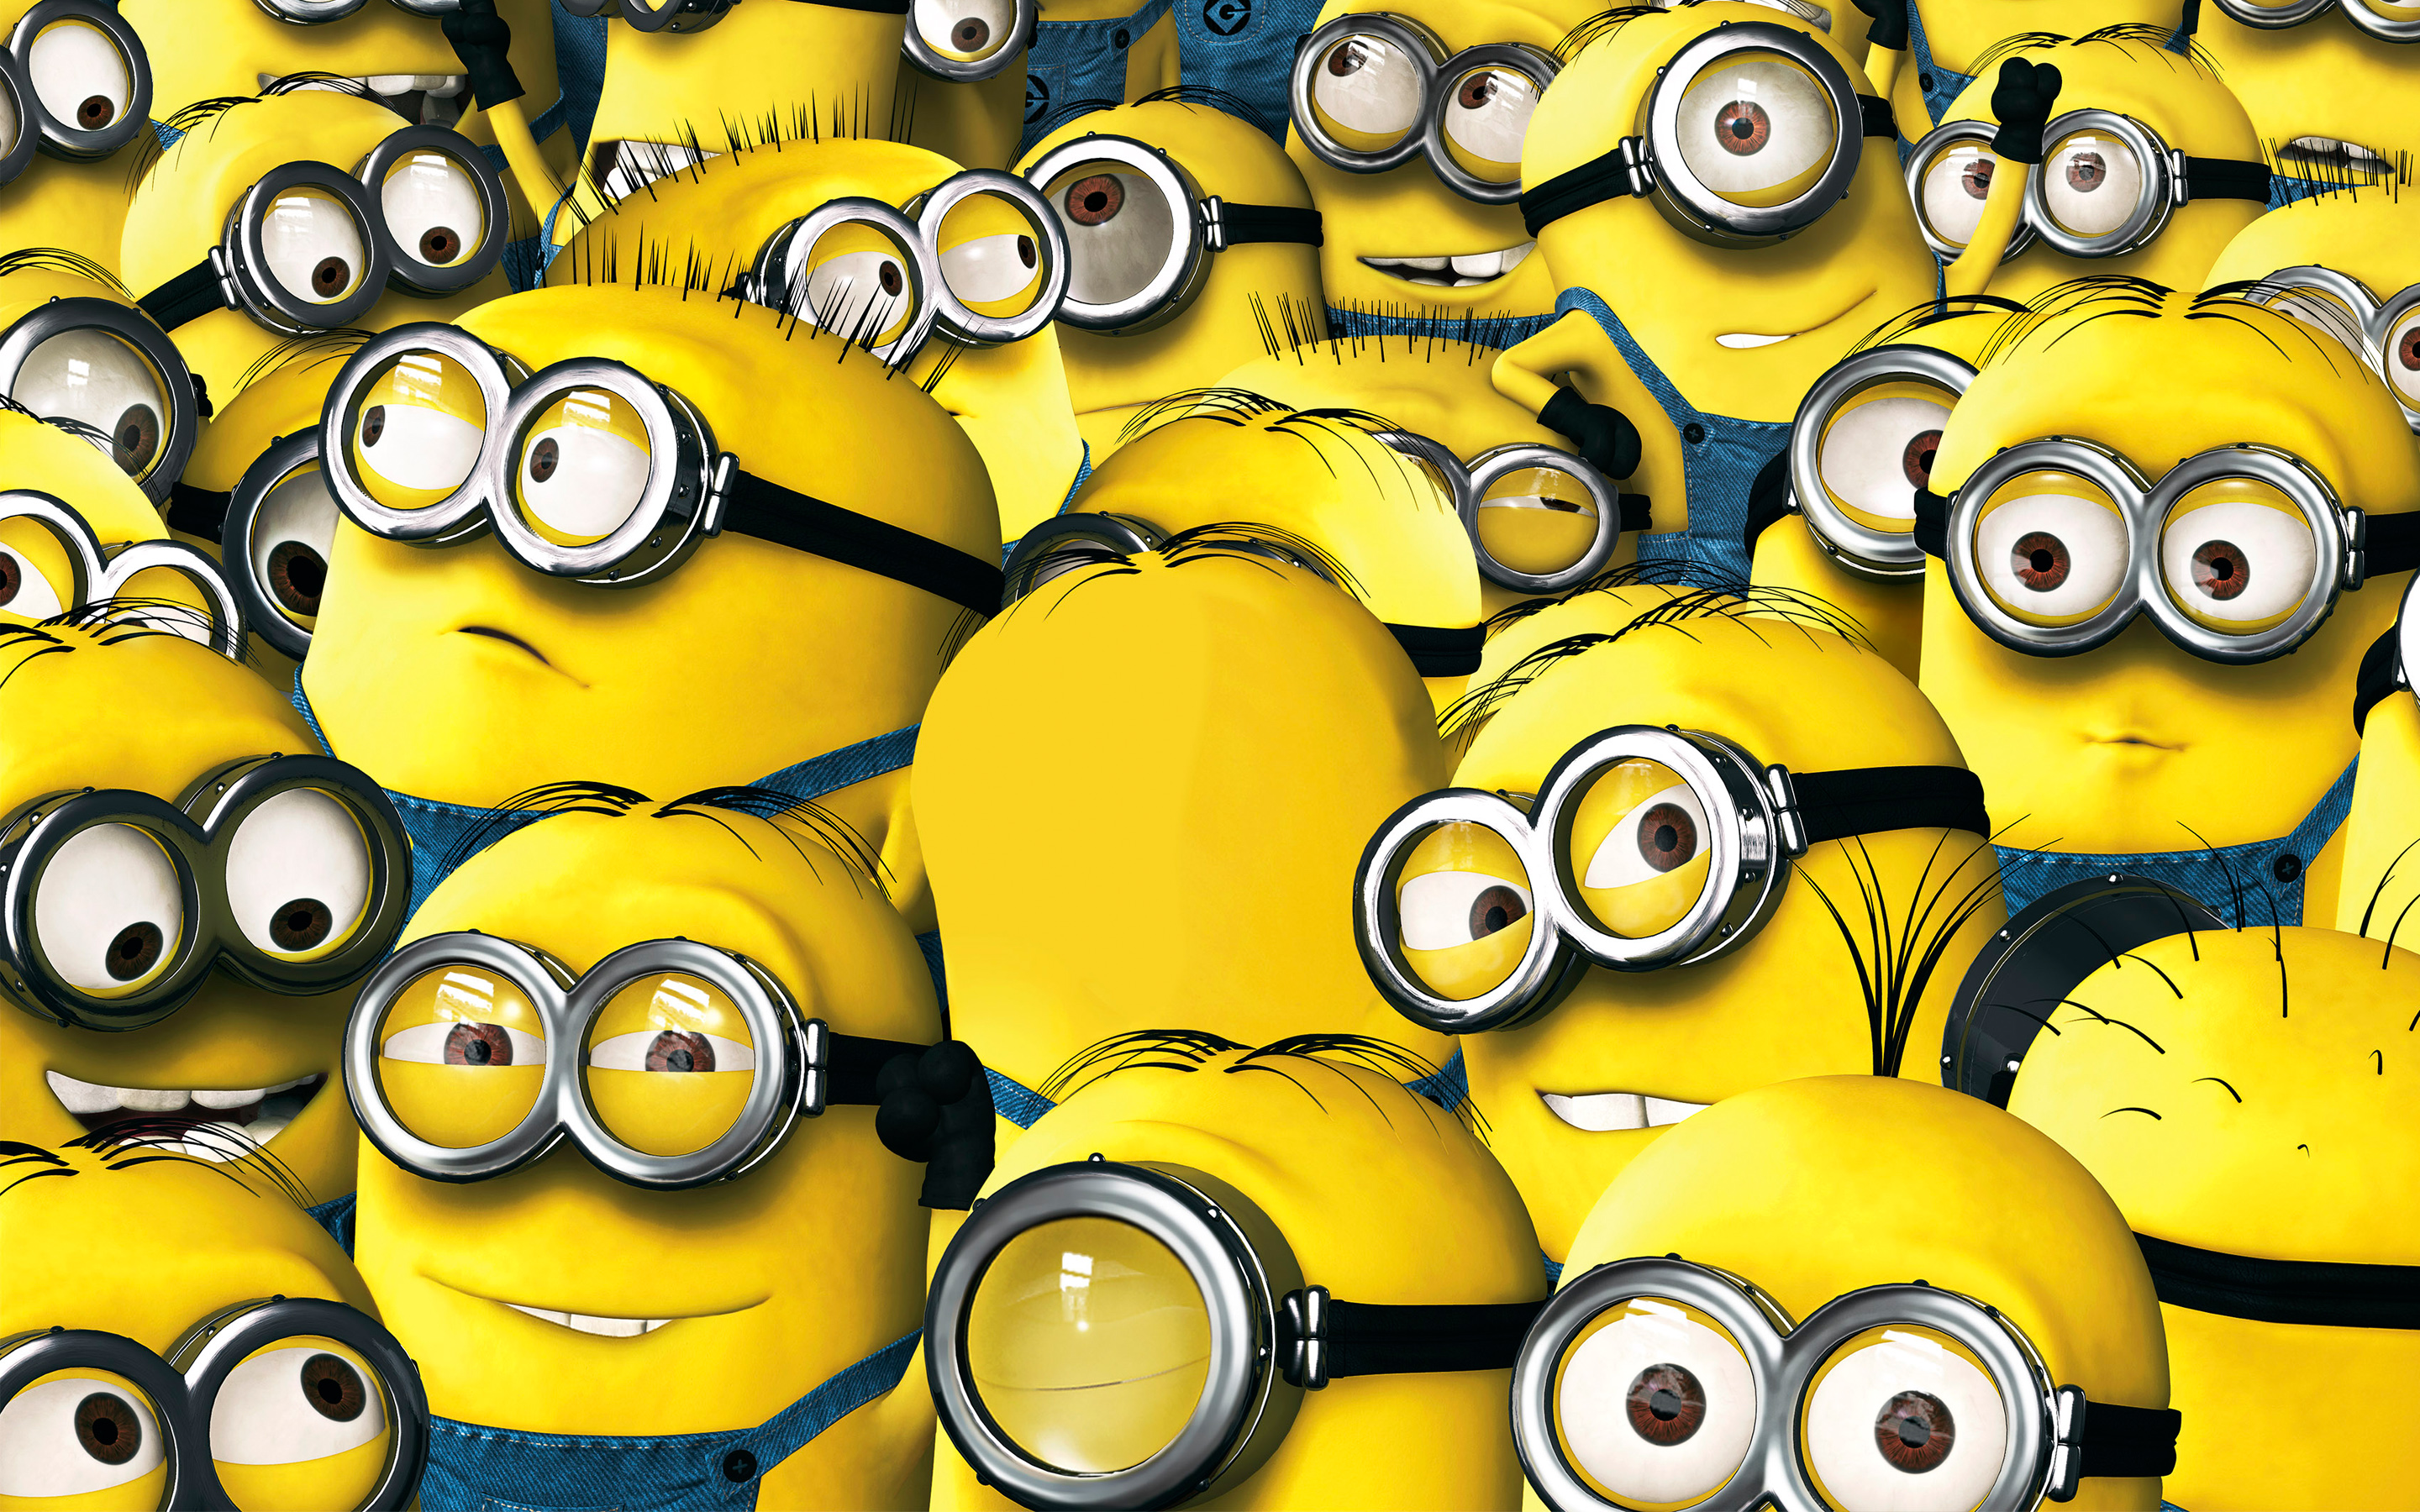 despicable me, movie, minions (movie) wallpapers for tablet